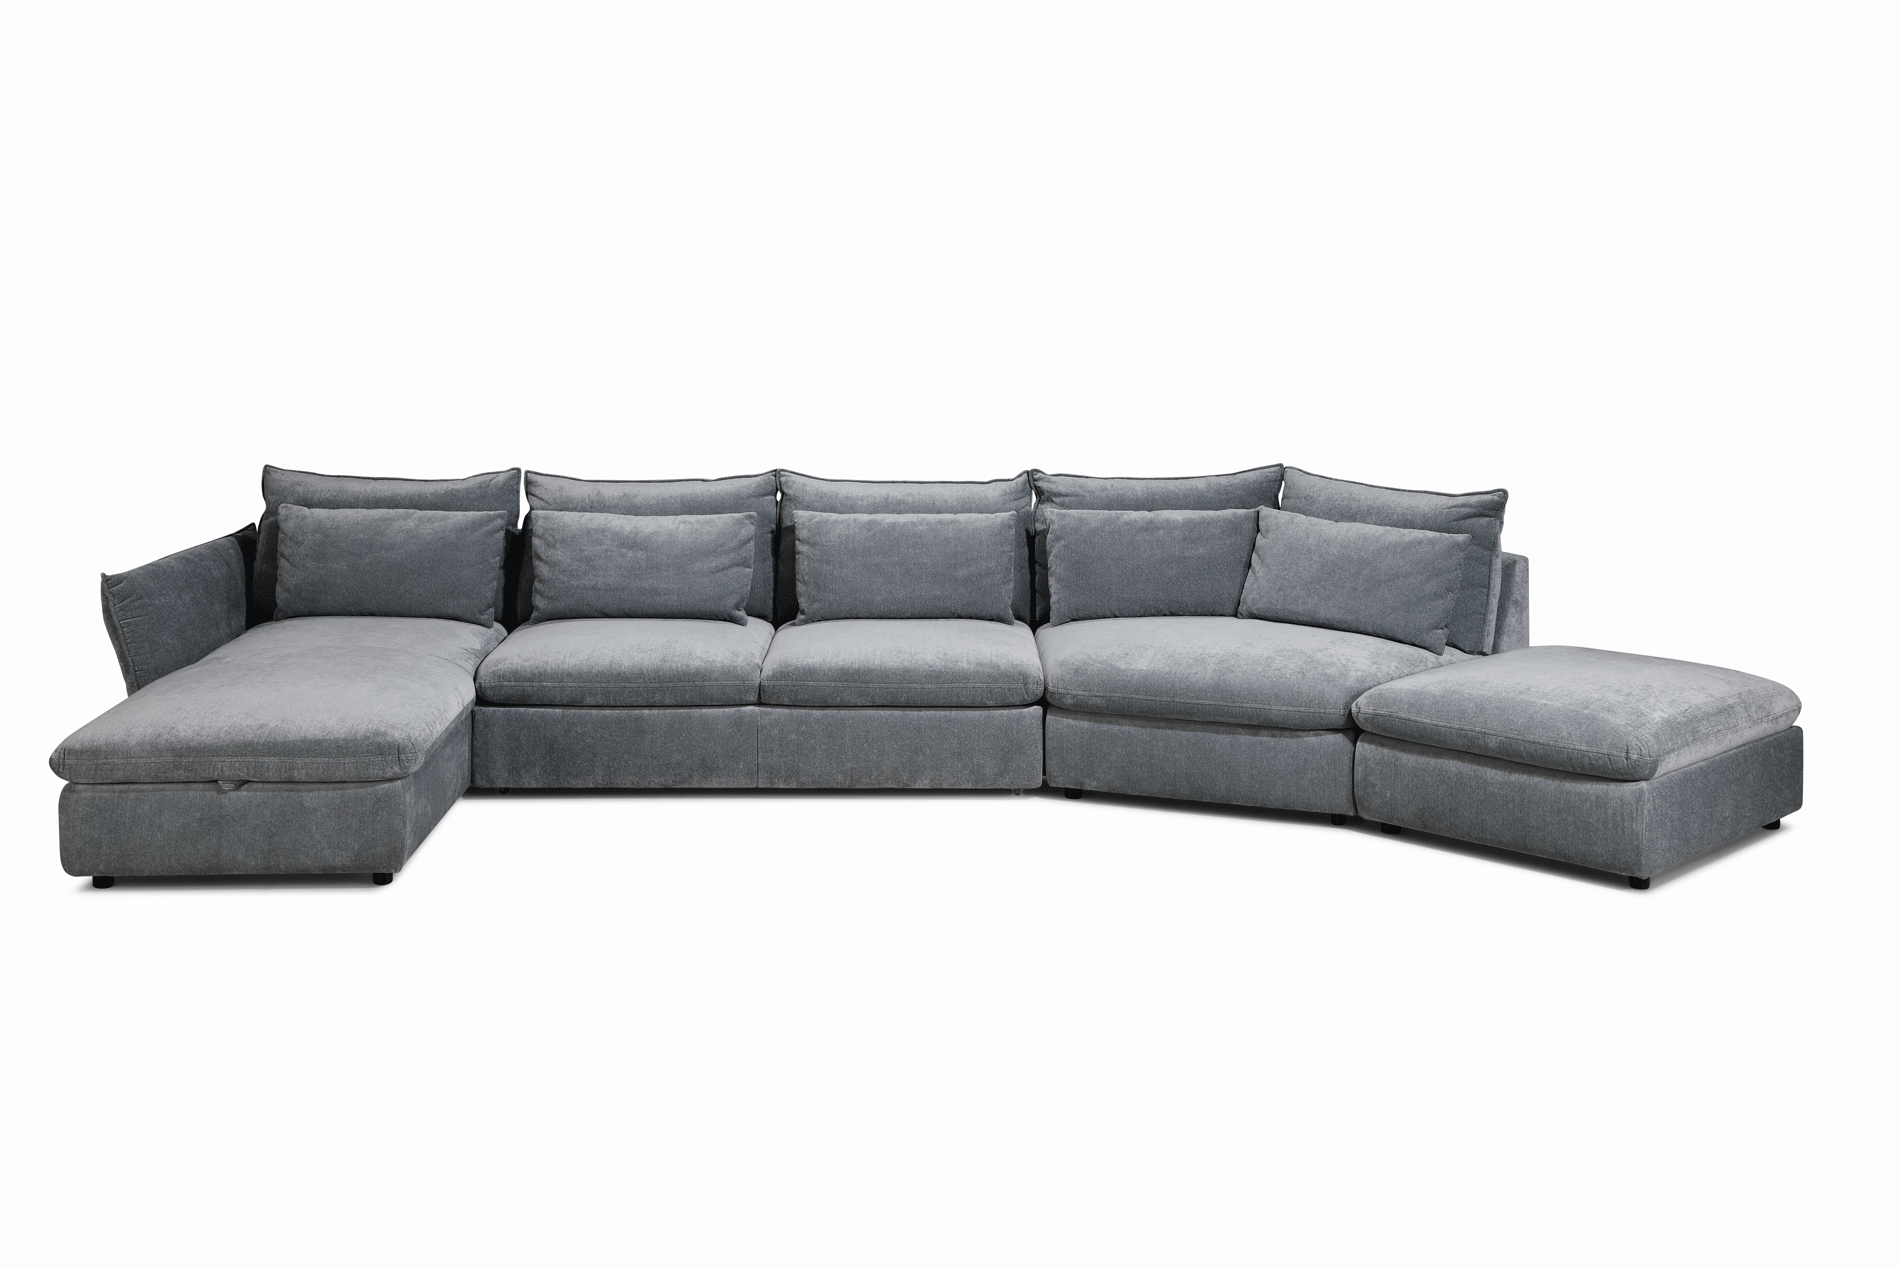 Living Room Furniture Reclining and Sliding Seats Sets Idylla Sectional w/ Bed & storage